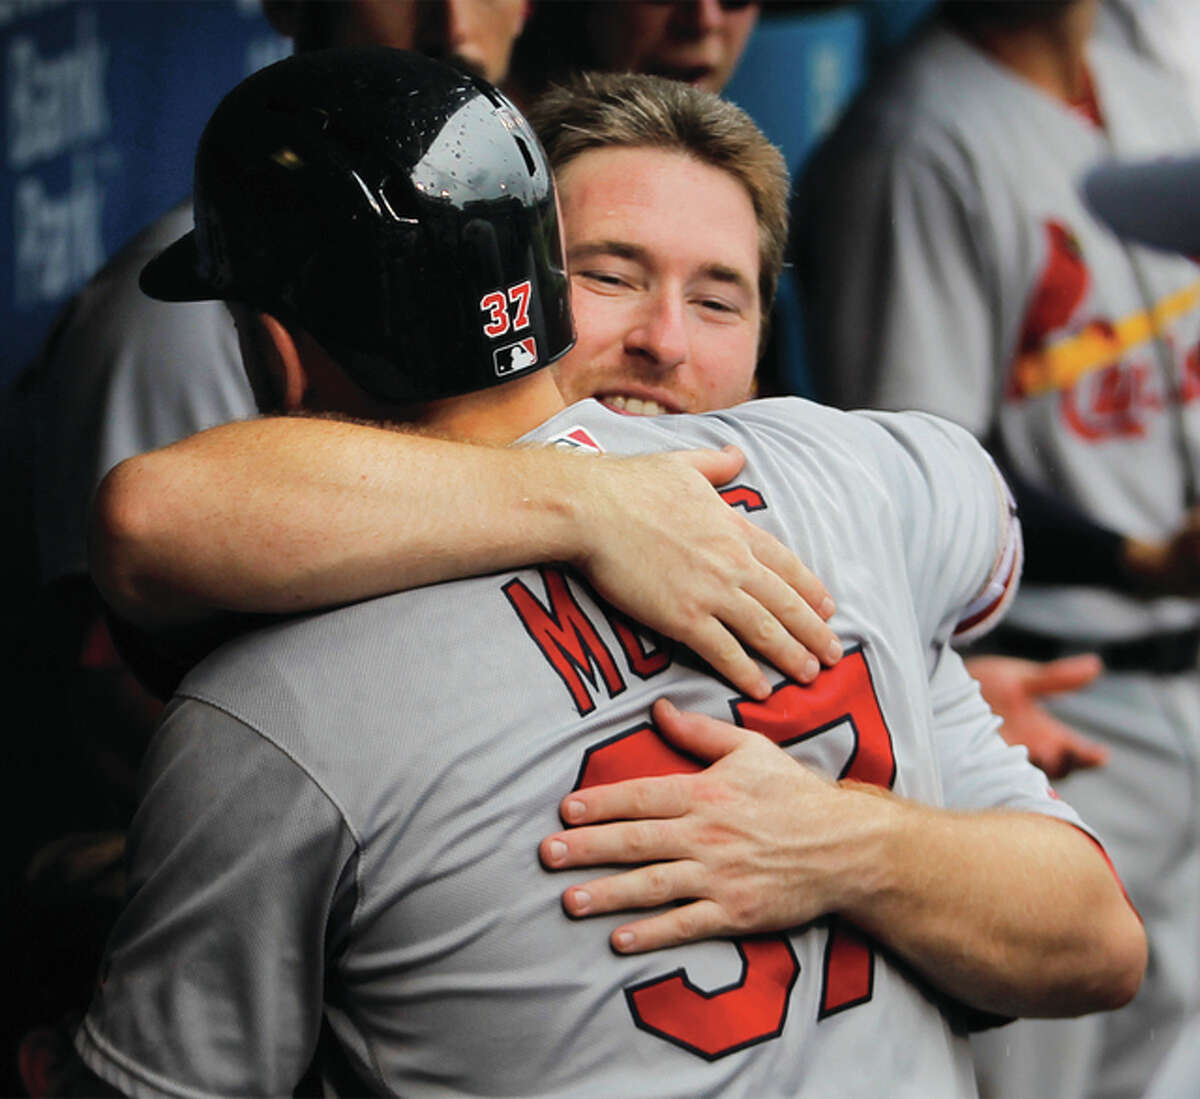 The Cardinals Brandon Moss is embraced by teammate Jedd Gyorko (facing) after Moss homered in the fourth inning Sunday in a win over the Phillies in Philadelphia.